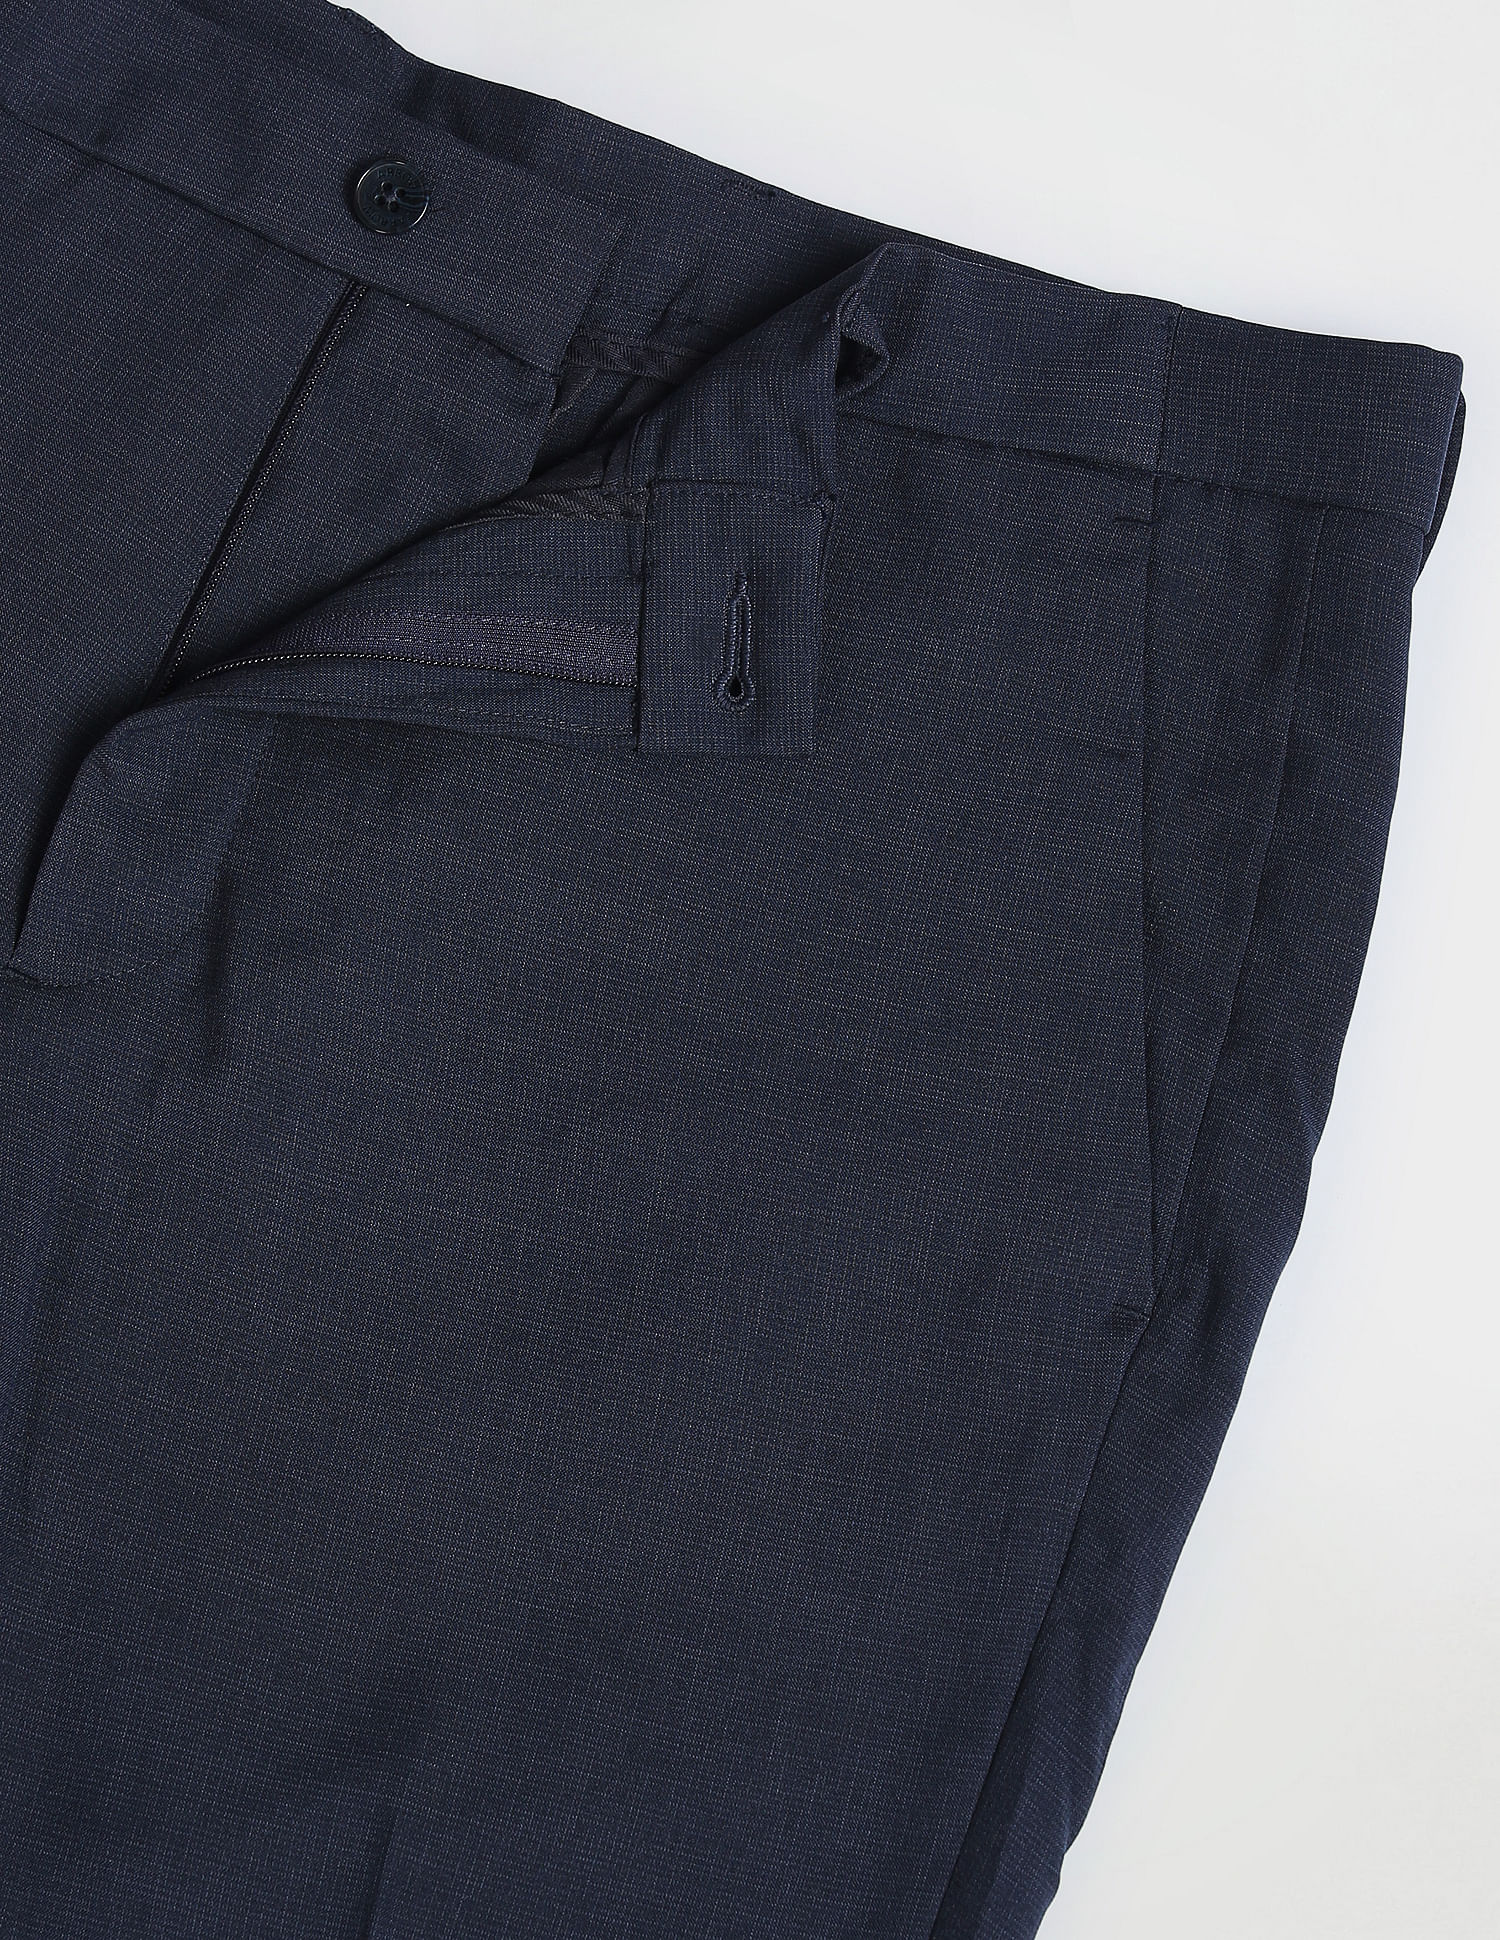 track trousers men navy in polyester - NEEDLES - d — 2